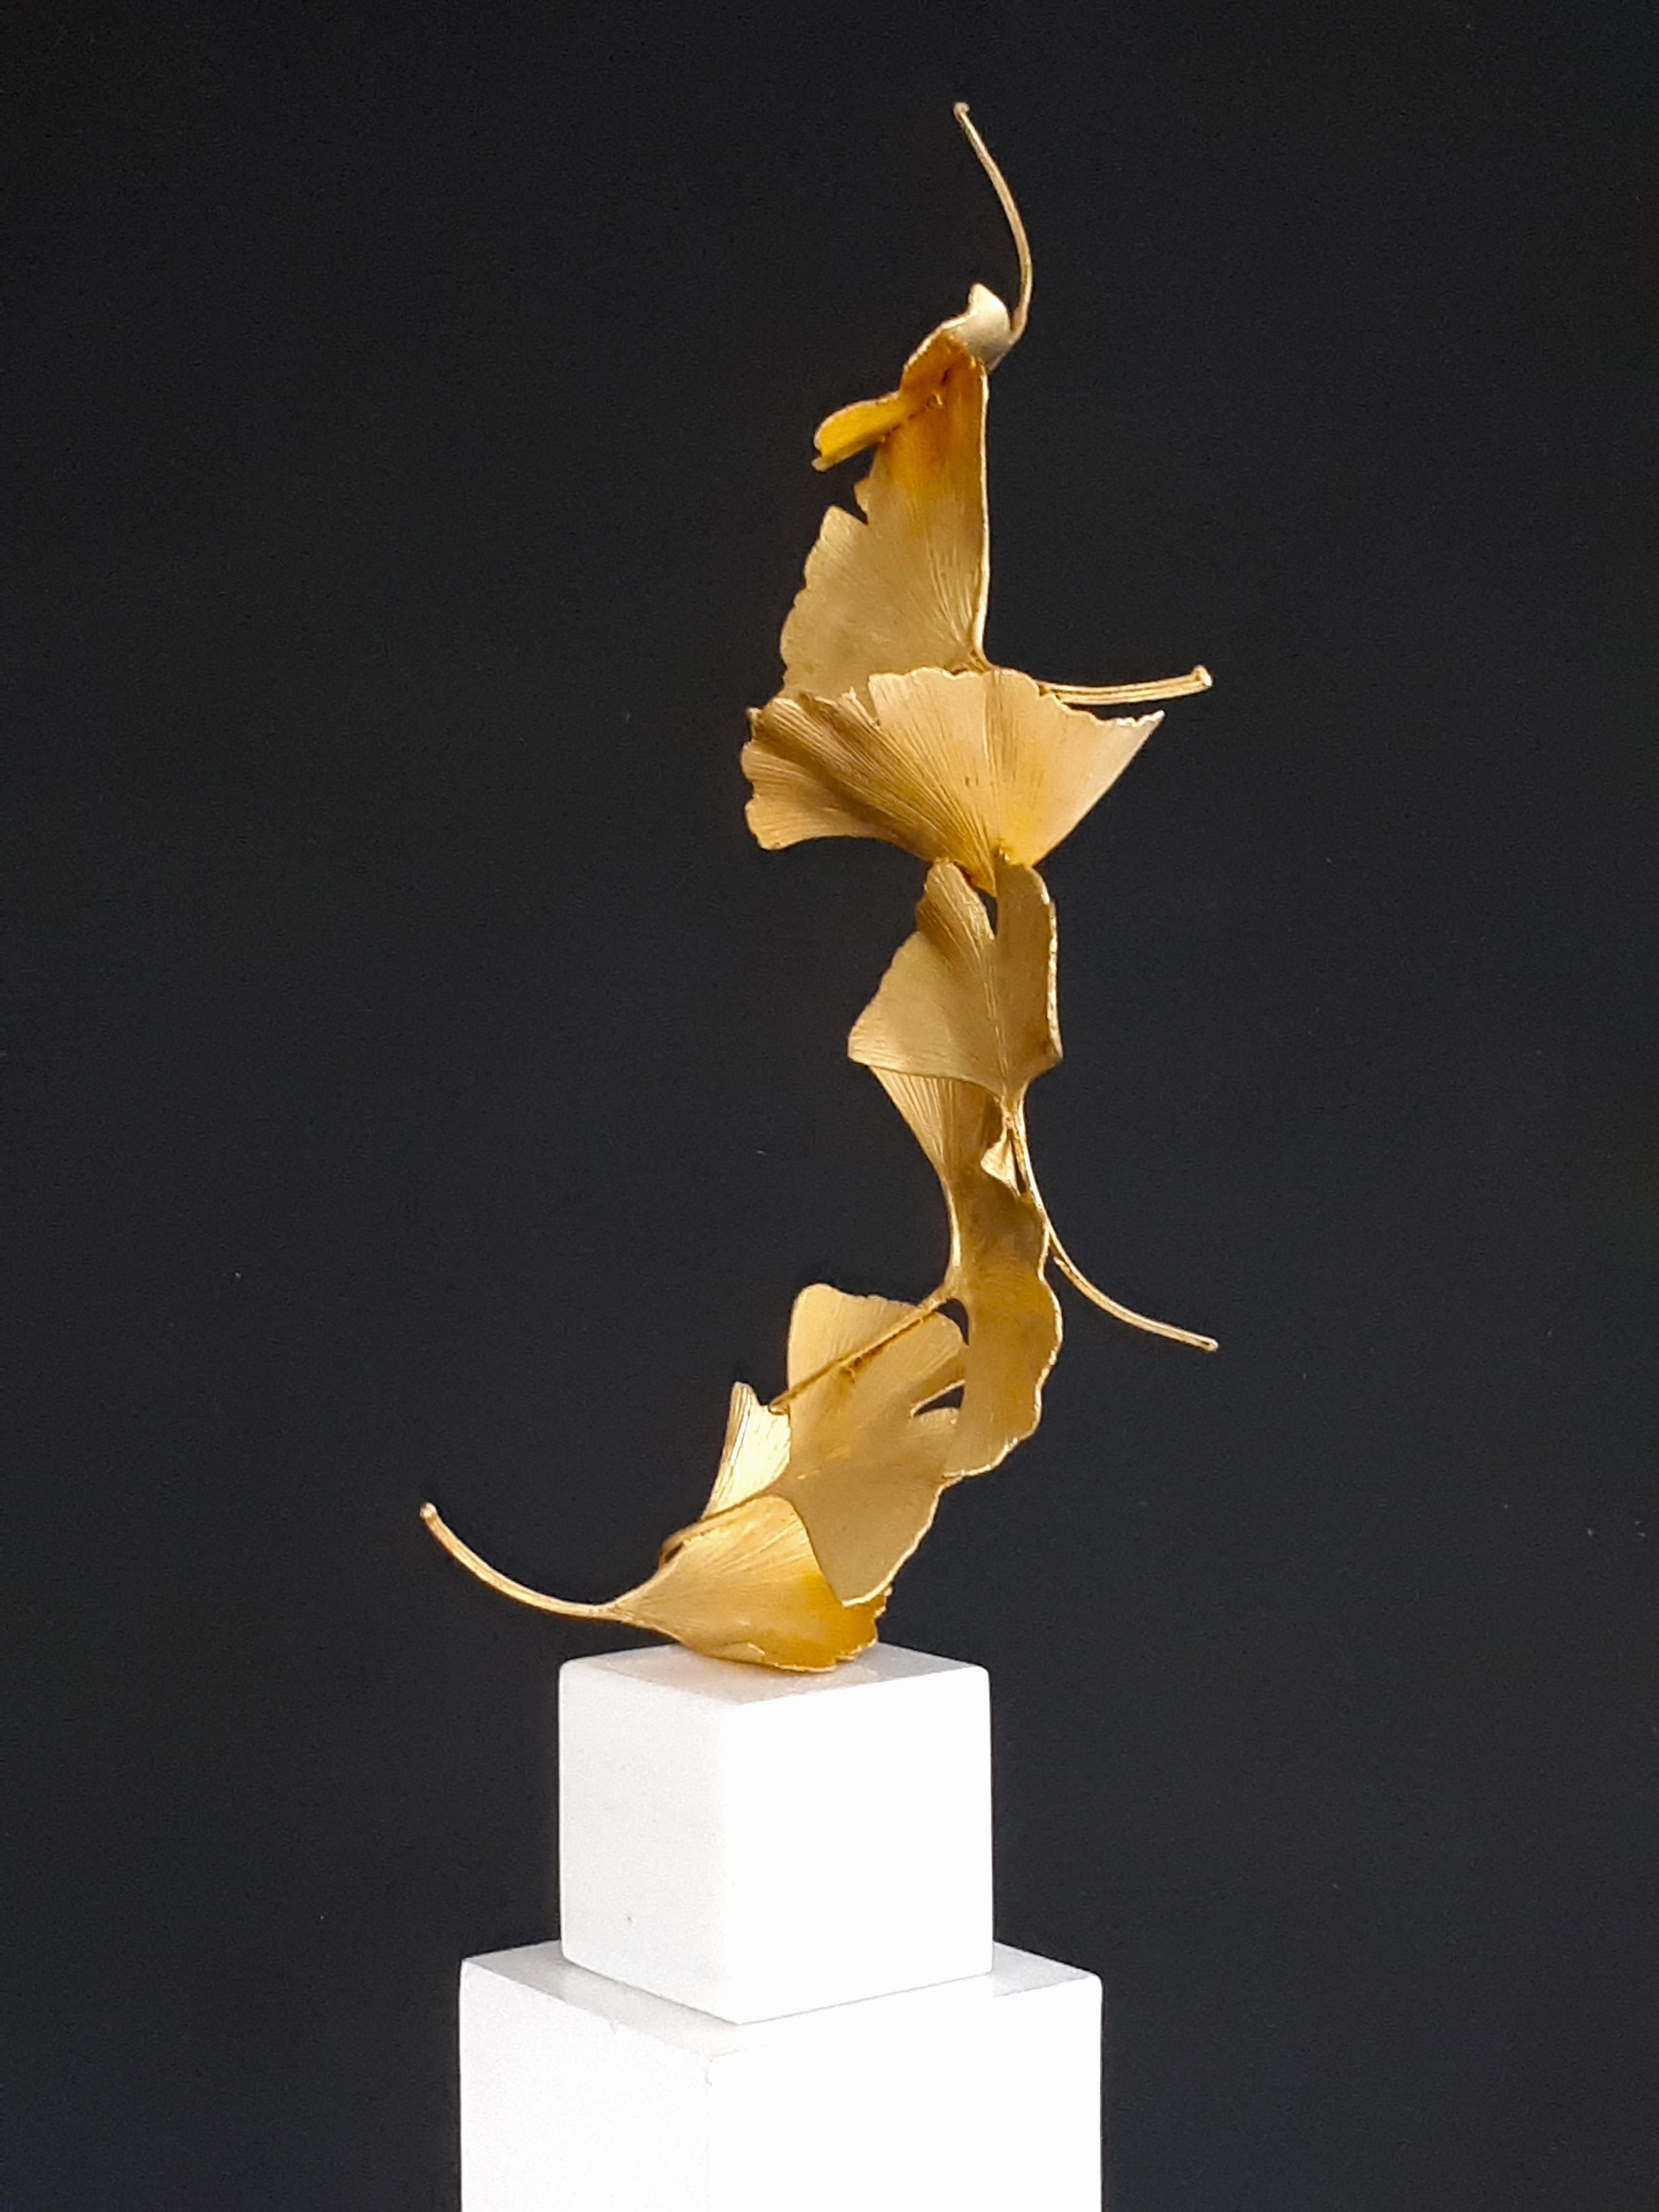 7 Golden Gingko Leaves by Kuno Vollet Gold leaf, brass on white marble base For Sale 3